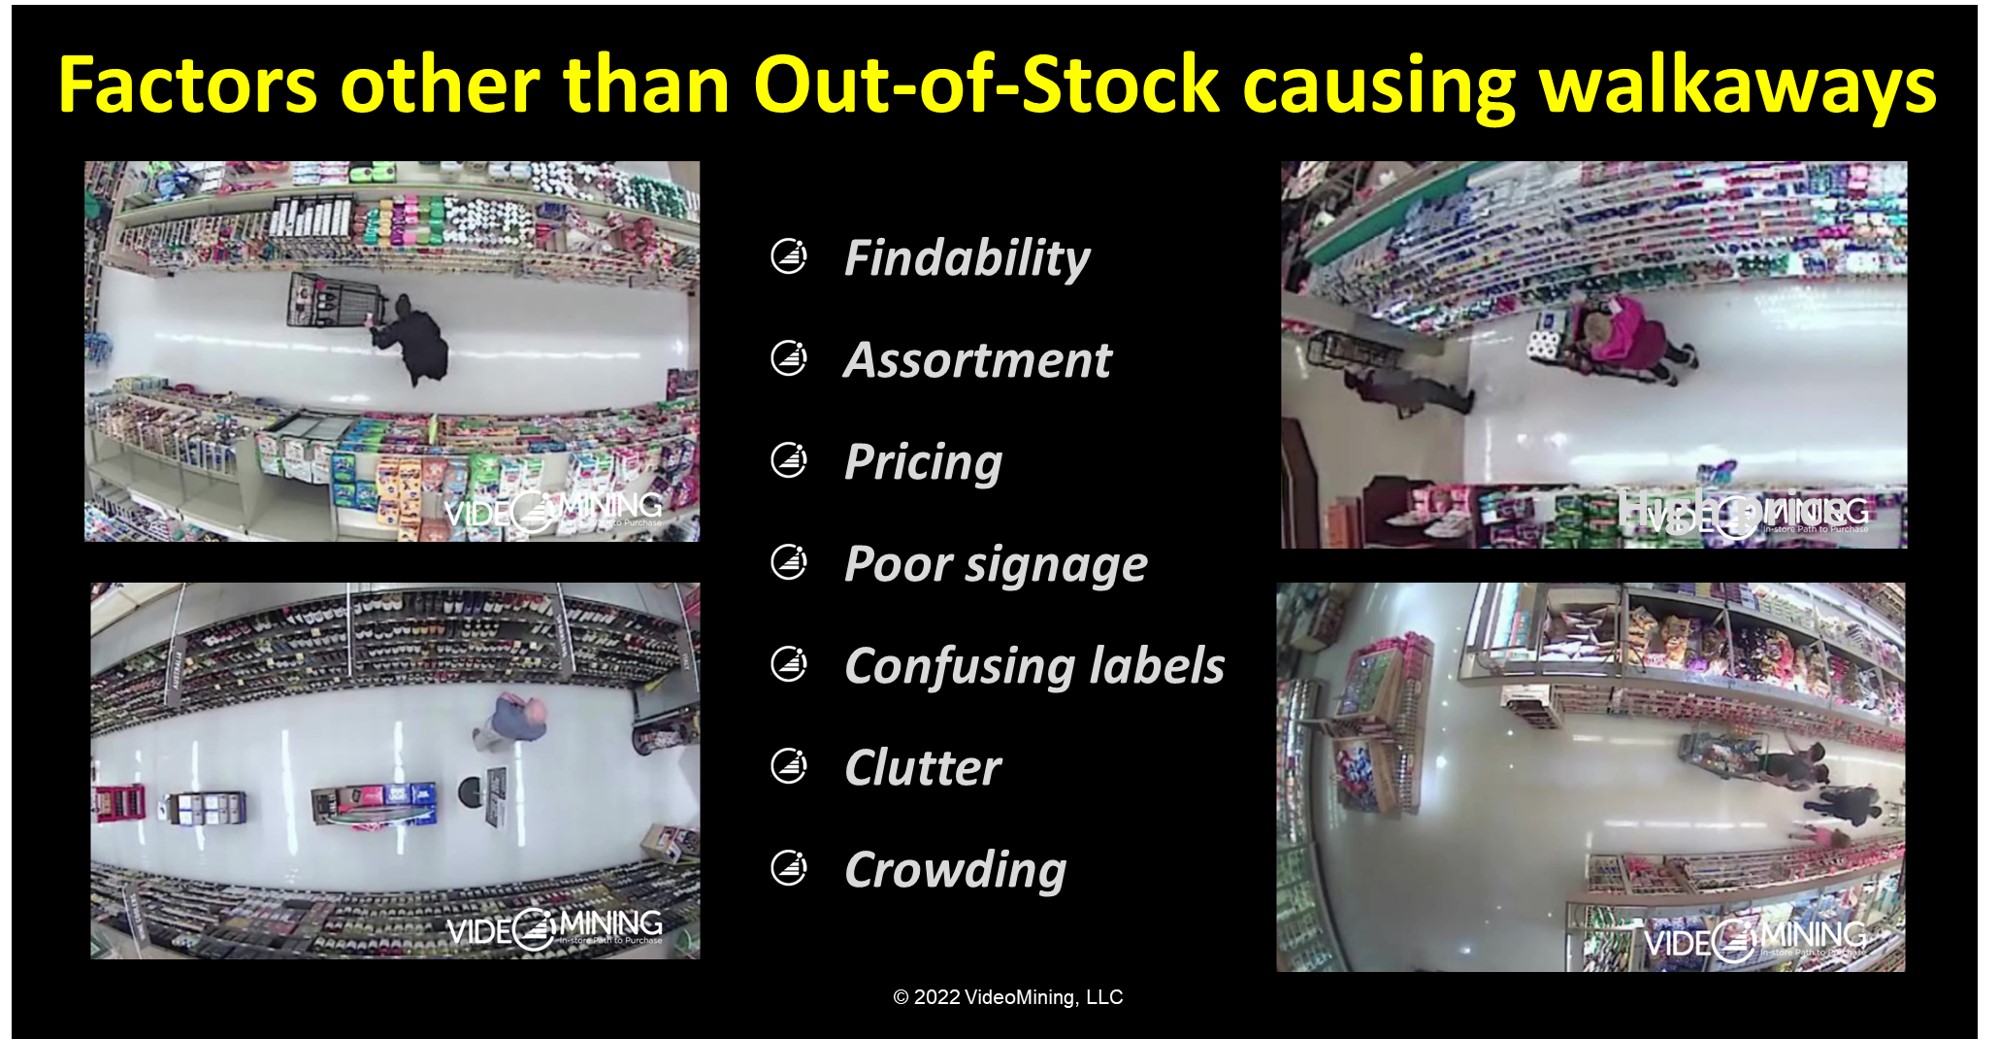 Out-of-Stock is not the key barrier to purchase 